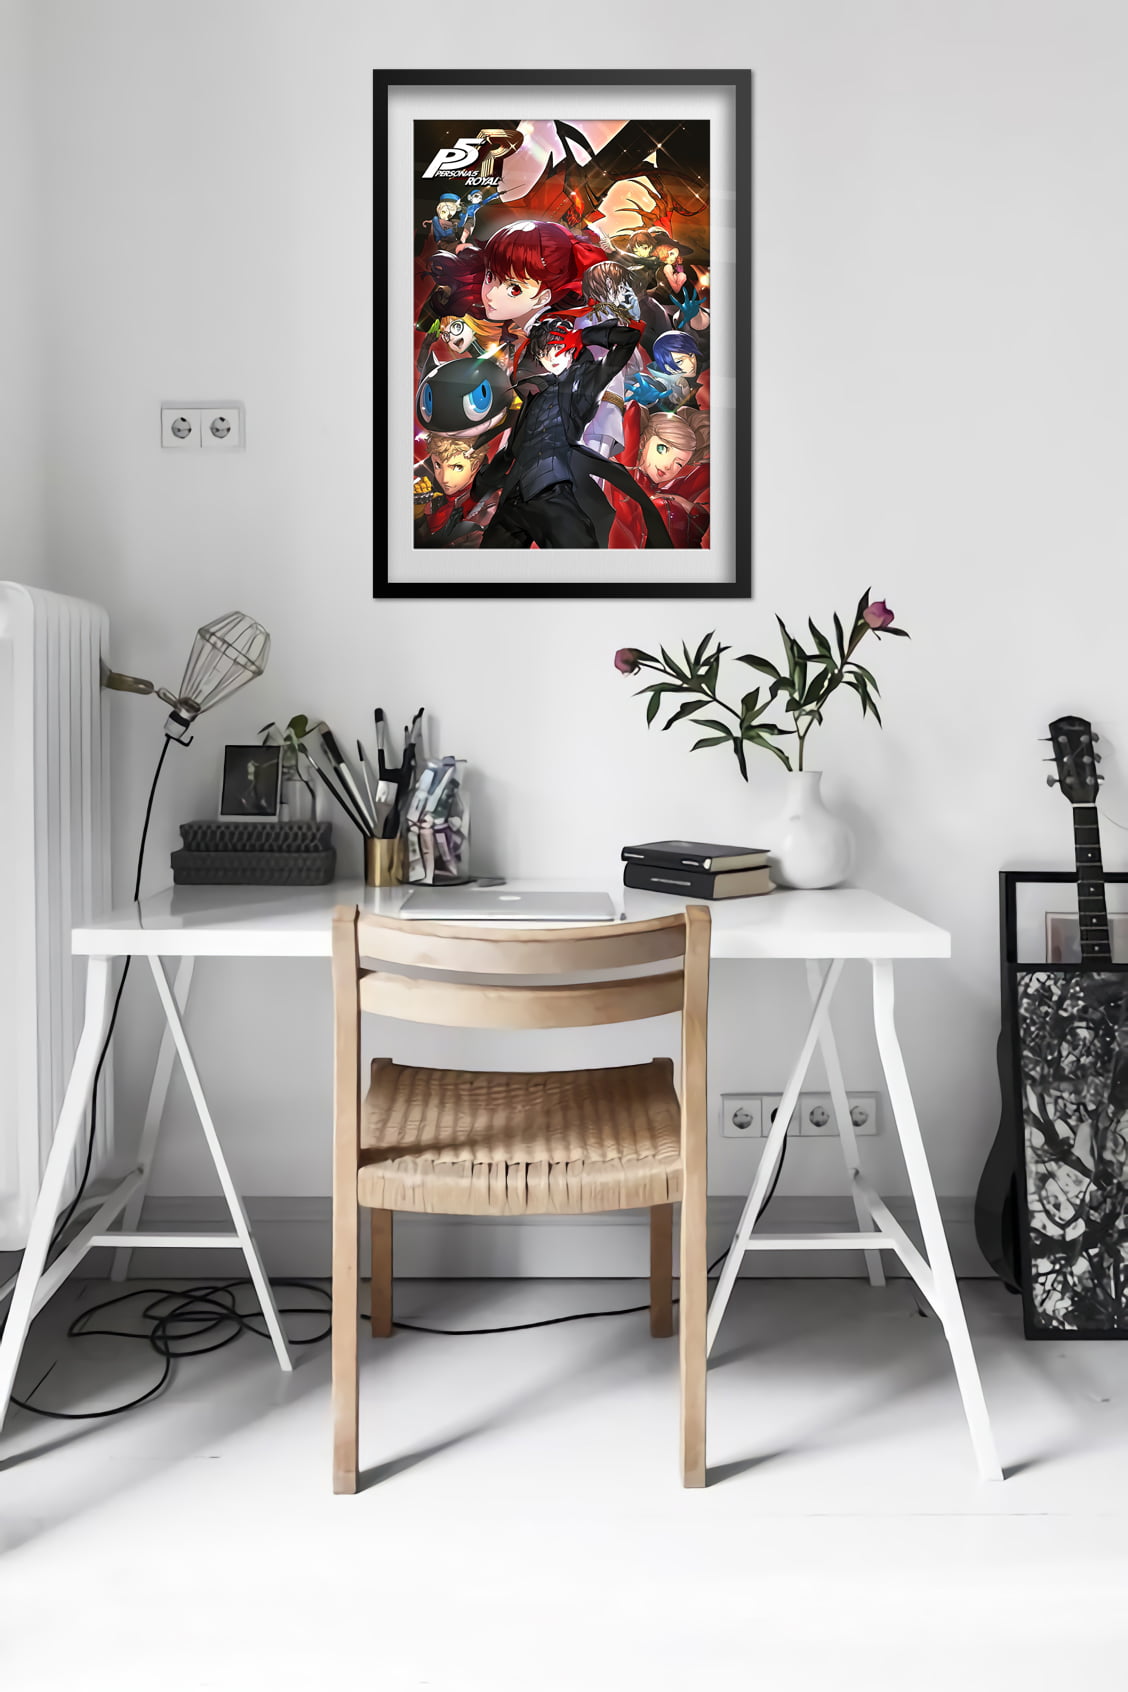 Persona 5 The Royal Game Poster Official Promotional Art High Quality Prints Unframed Version 18x24 Com